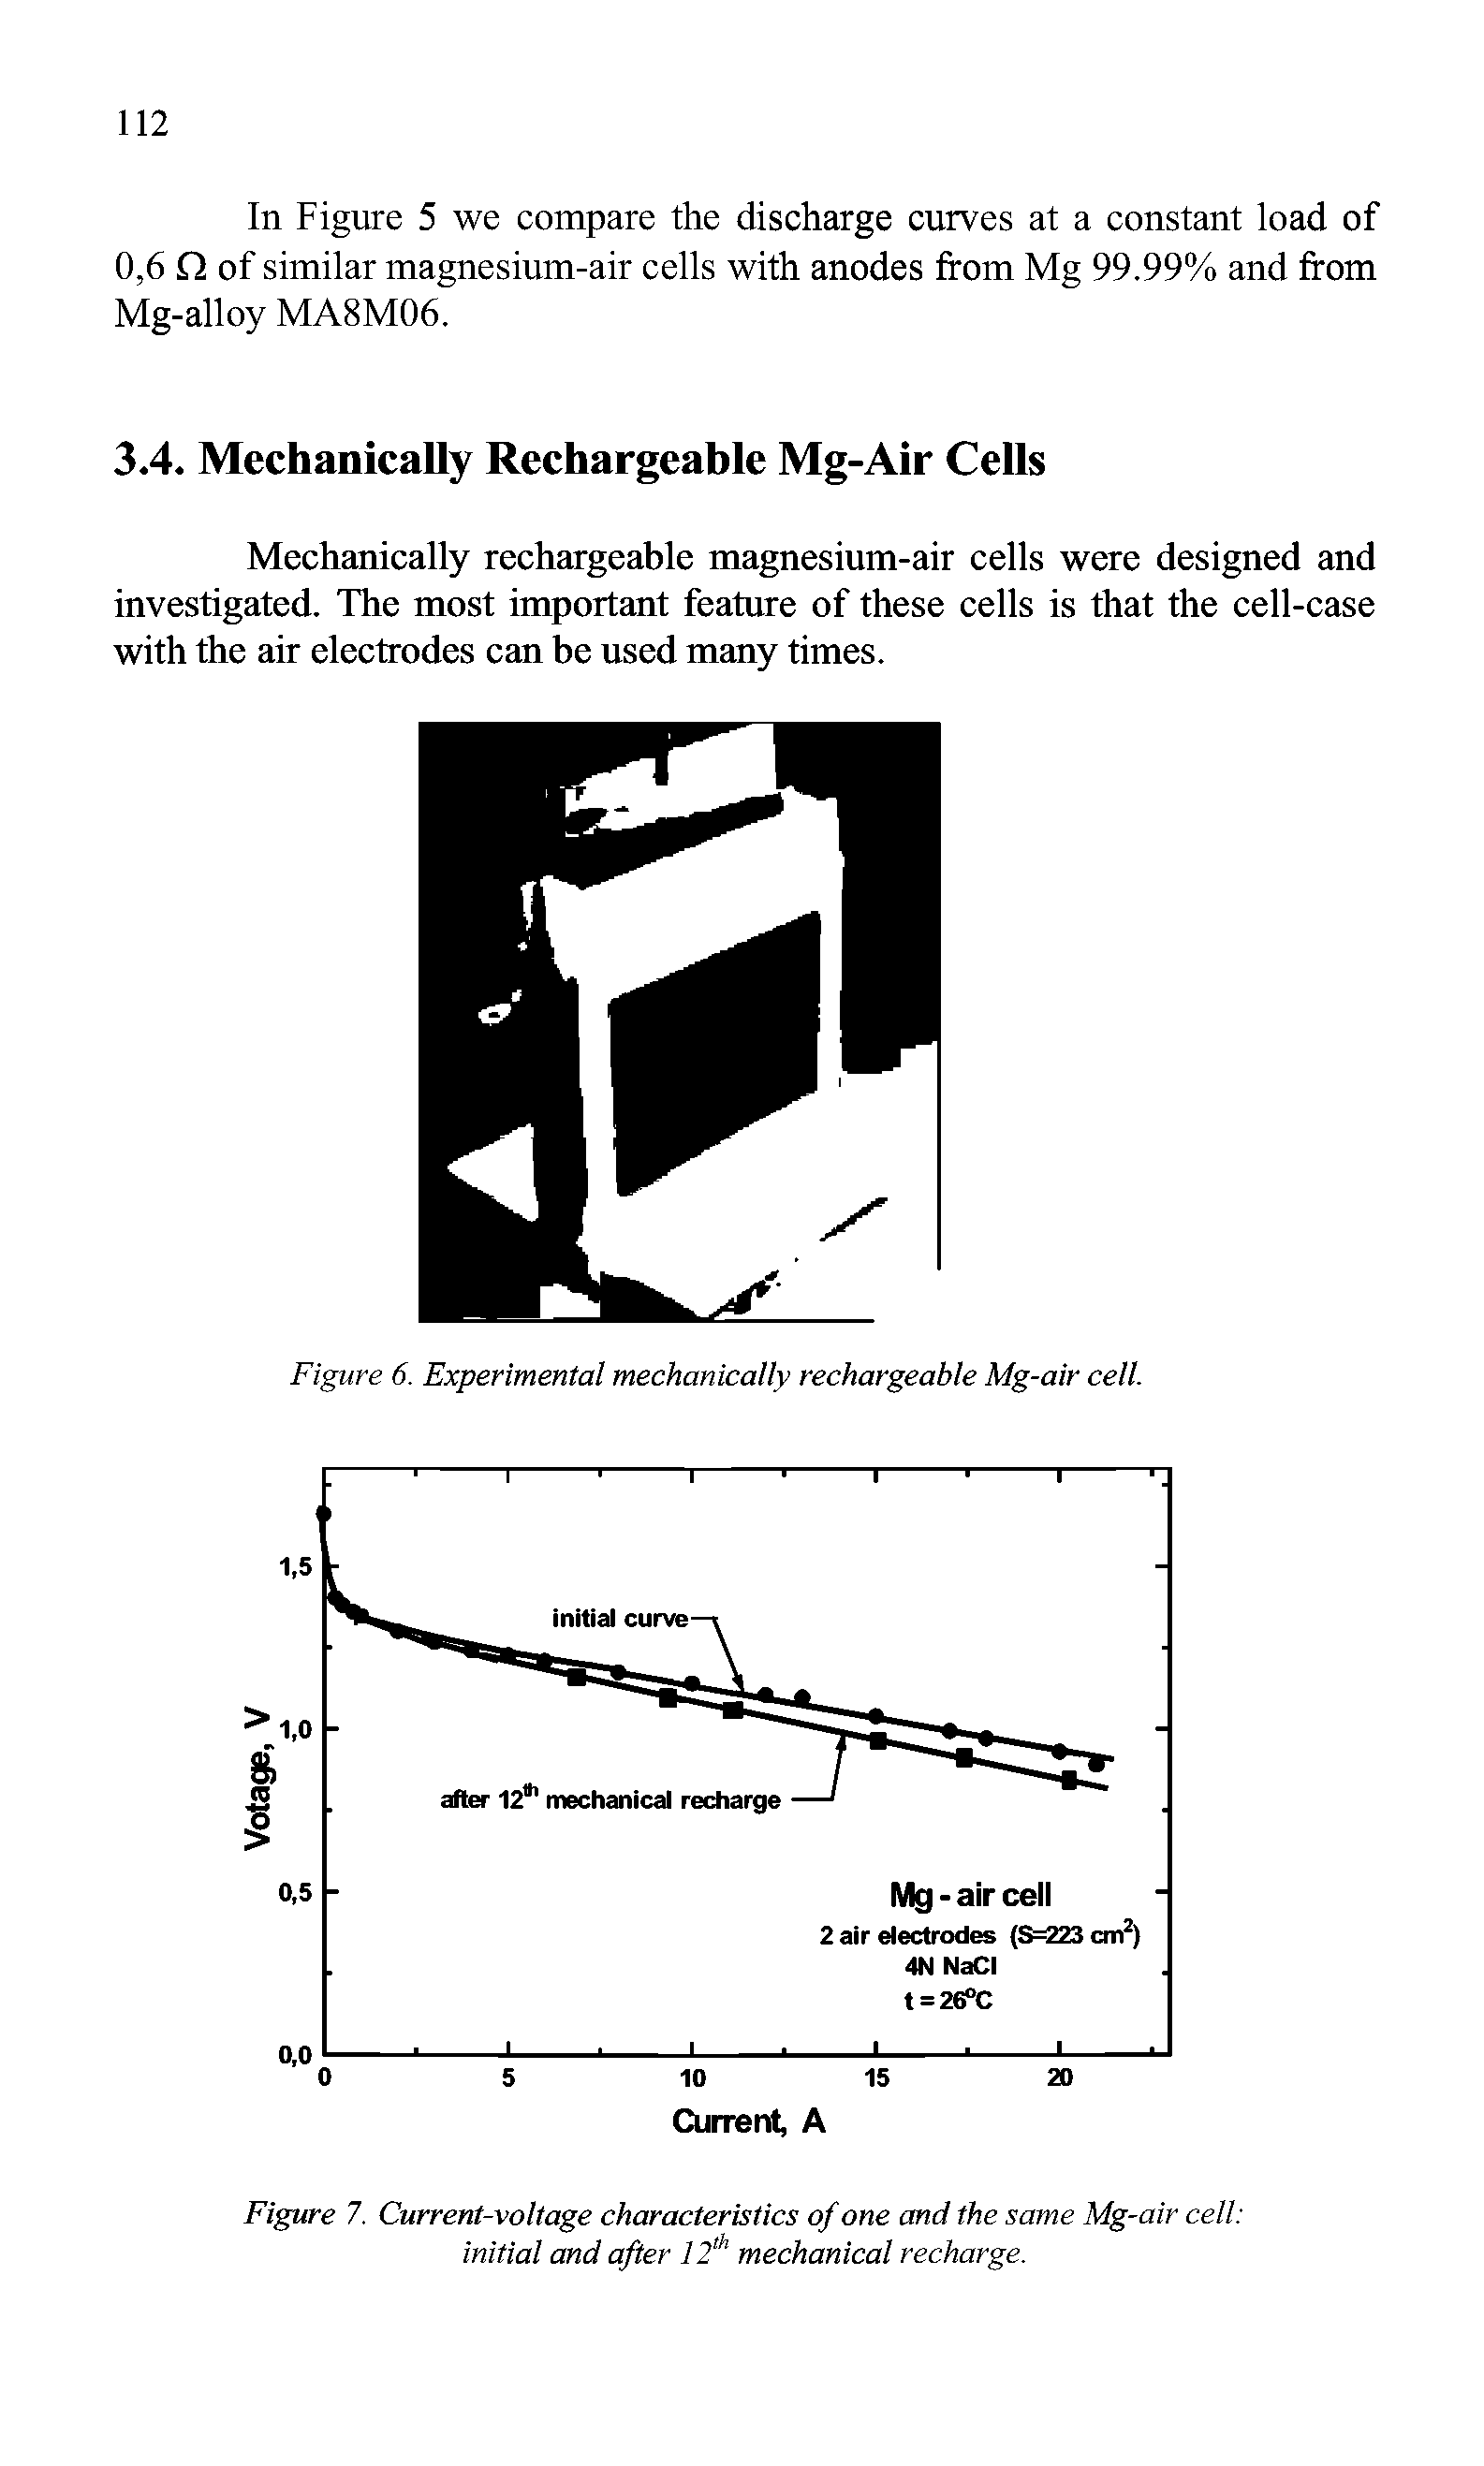 Figure 7. Current-voltage characteristics of one and the same Mg-air cell initial and after 12th mechanical recharge.